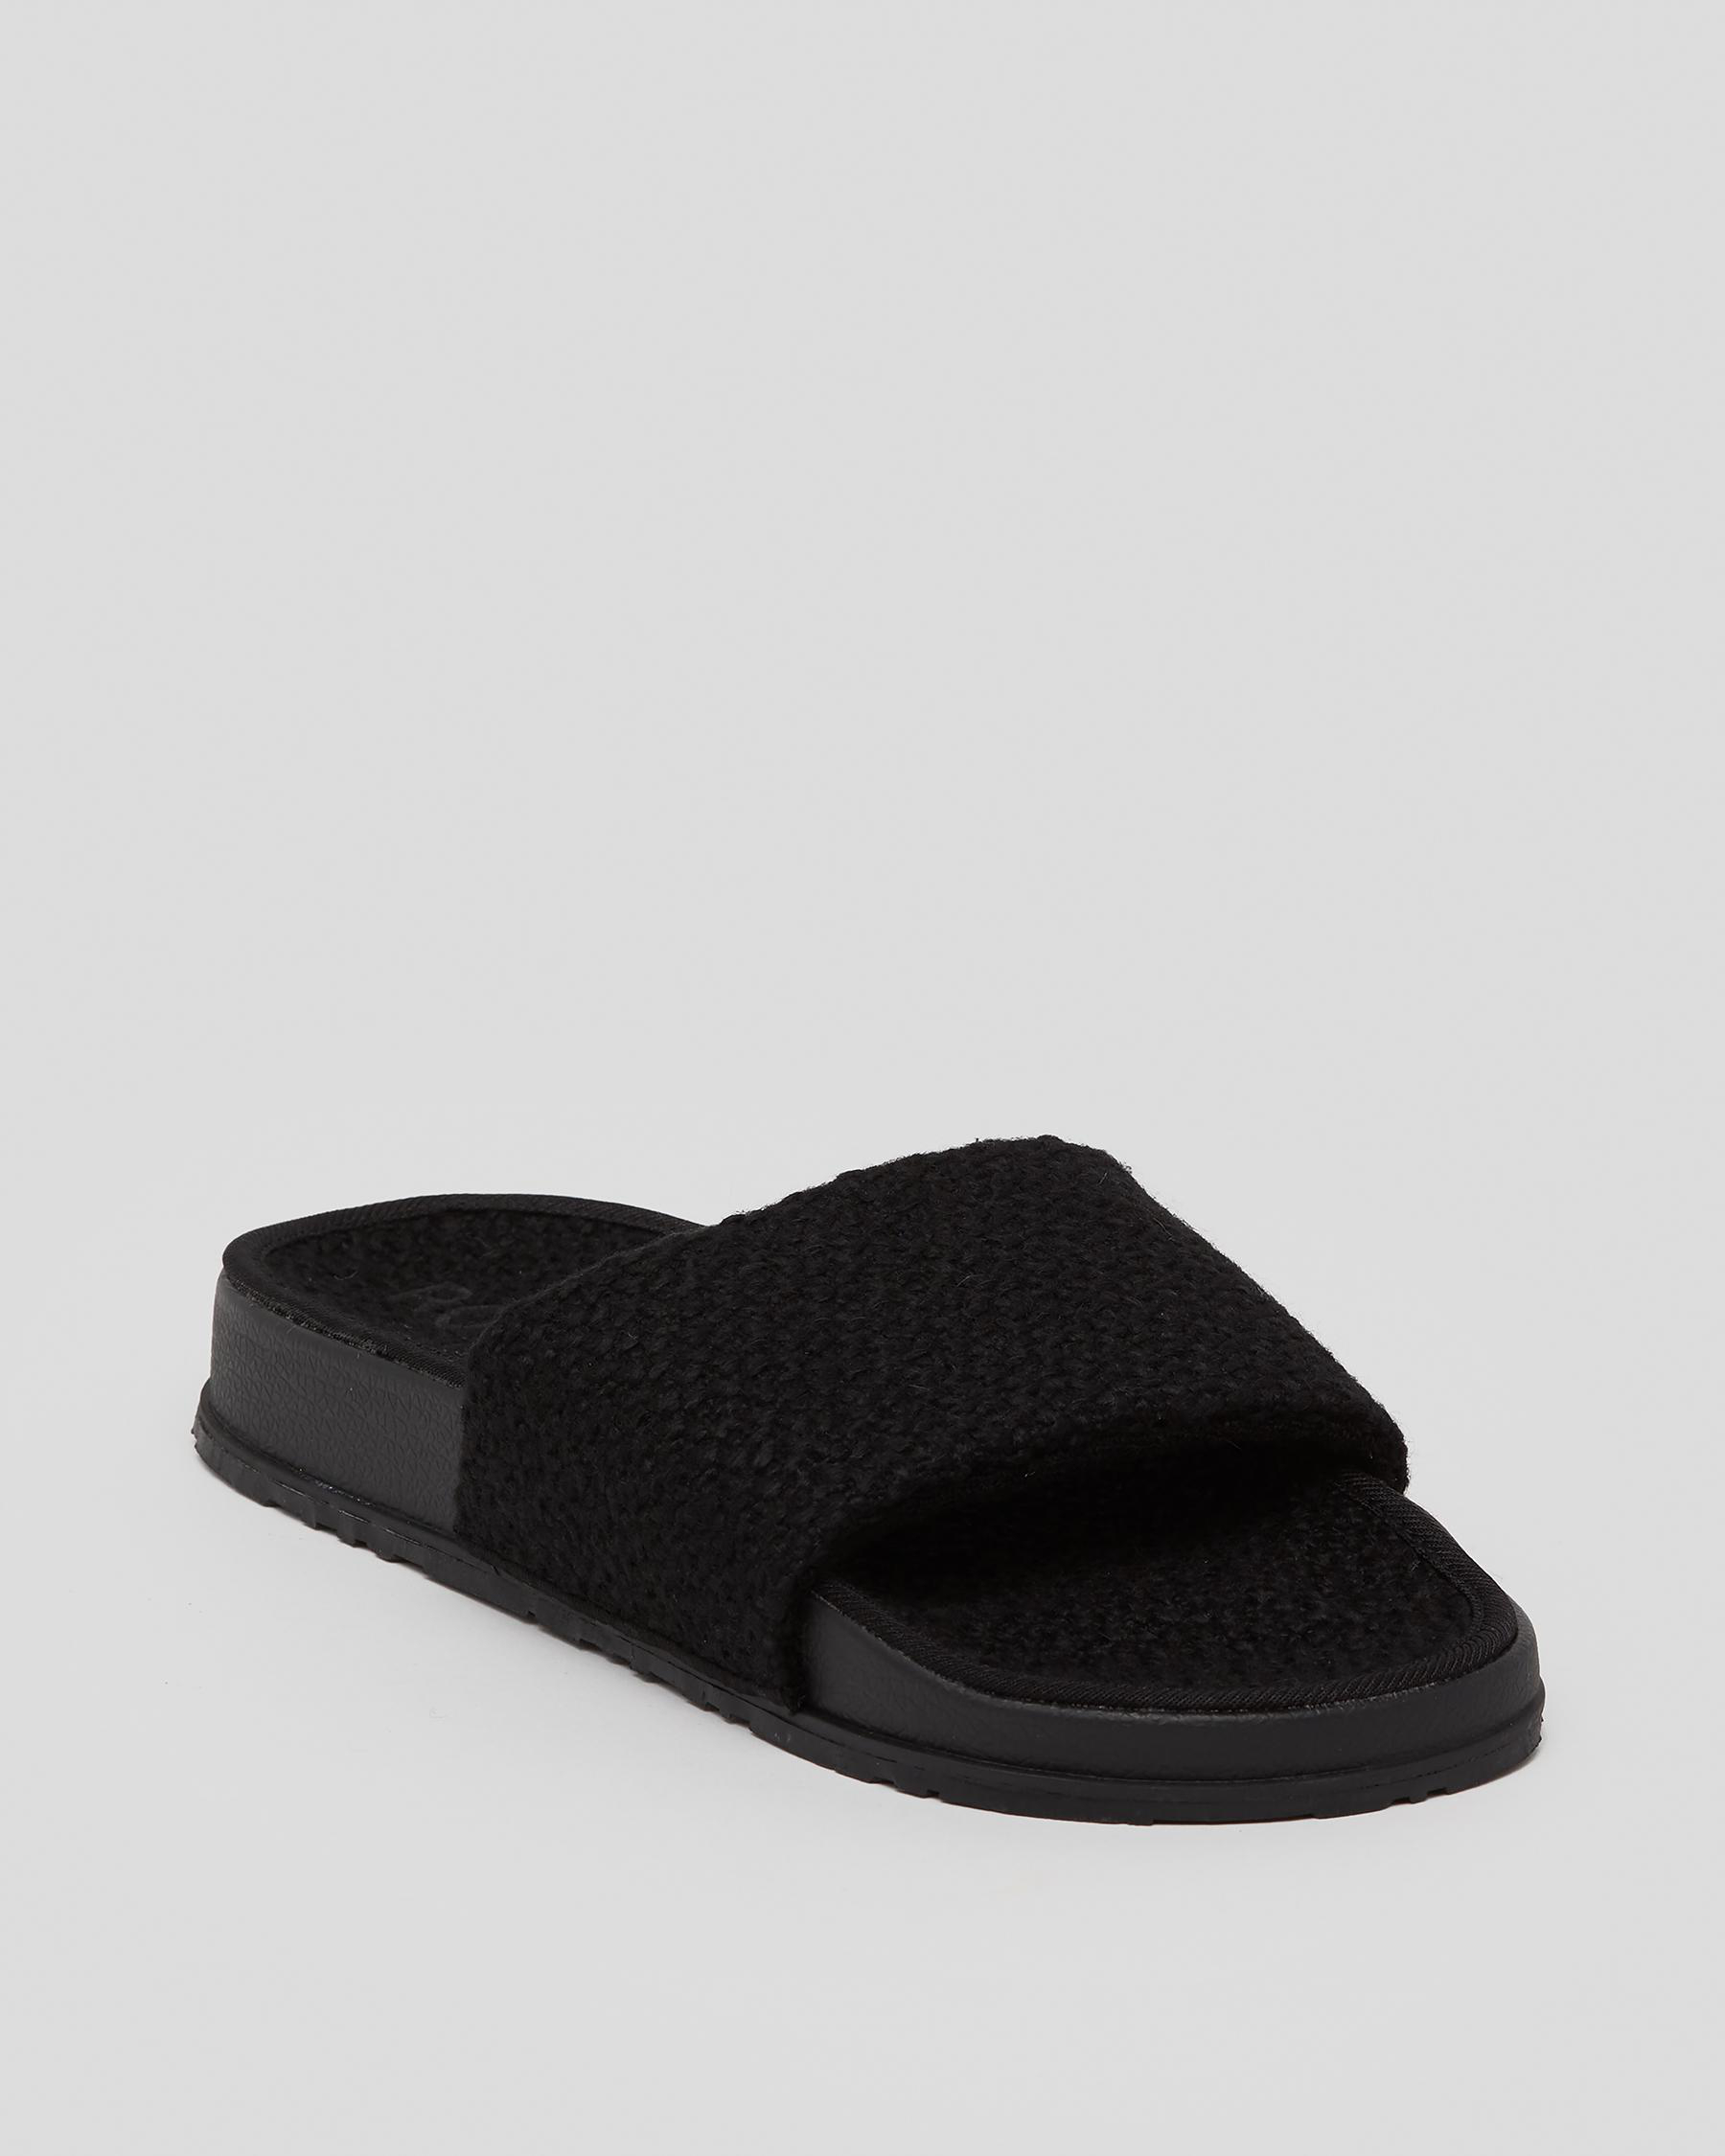 Shop Roxy Slippy Boucle Slide Sandals In Black - Fast Shipping & Easy ...